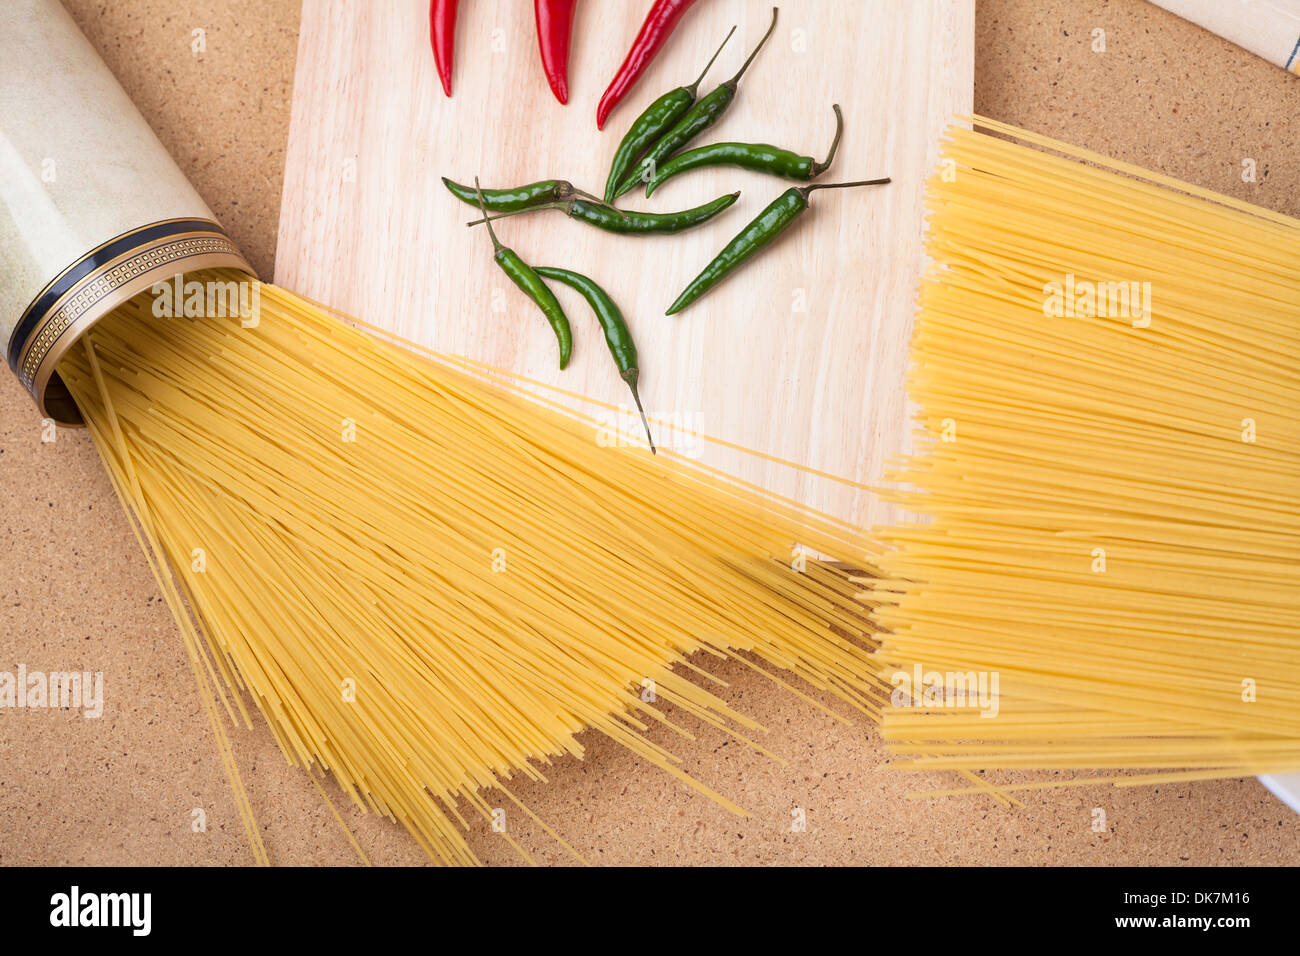 Dried uncooked pasta and chili peppers on wooden table. Stock Photo